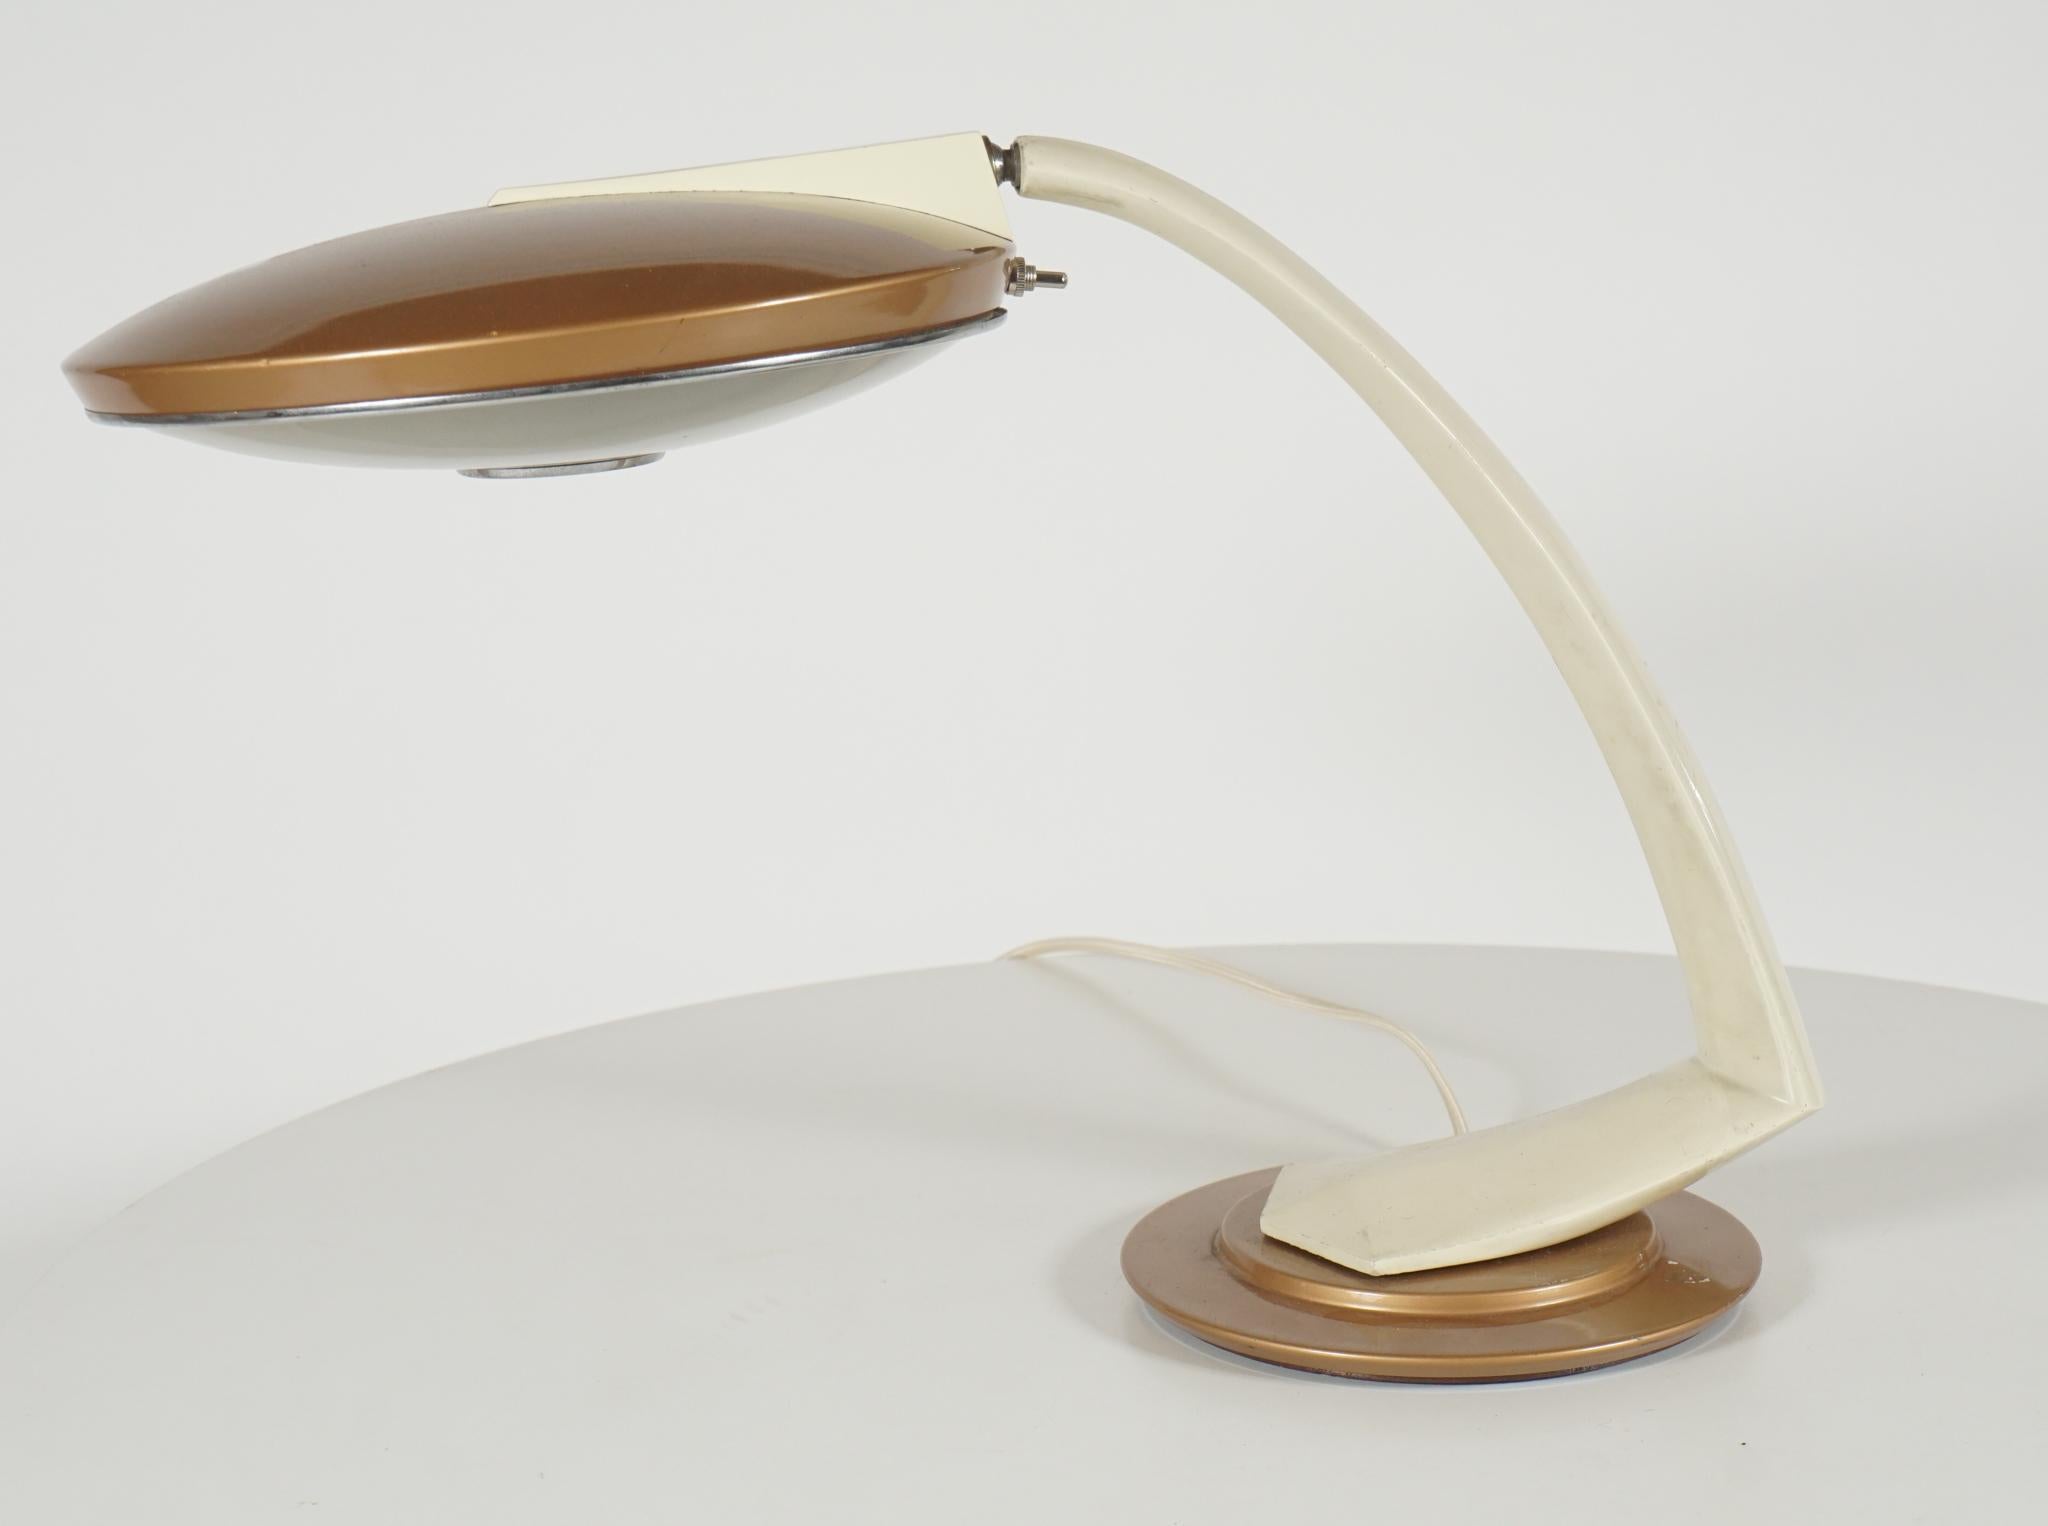 Midcentury desk lamp with 360 degree, revolving feature. Disk shaped light also has a 360 degree rotation cream colored arm and base. Copper
Top, light with diffuser covering bulb.